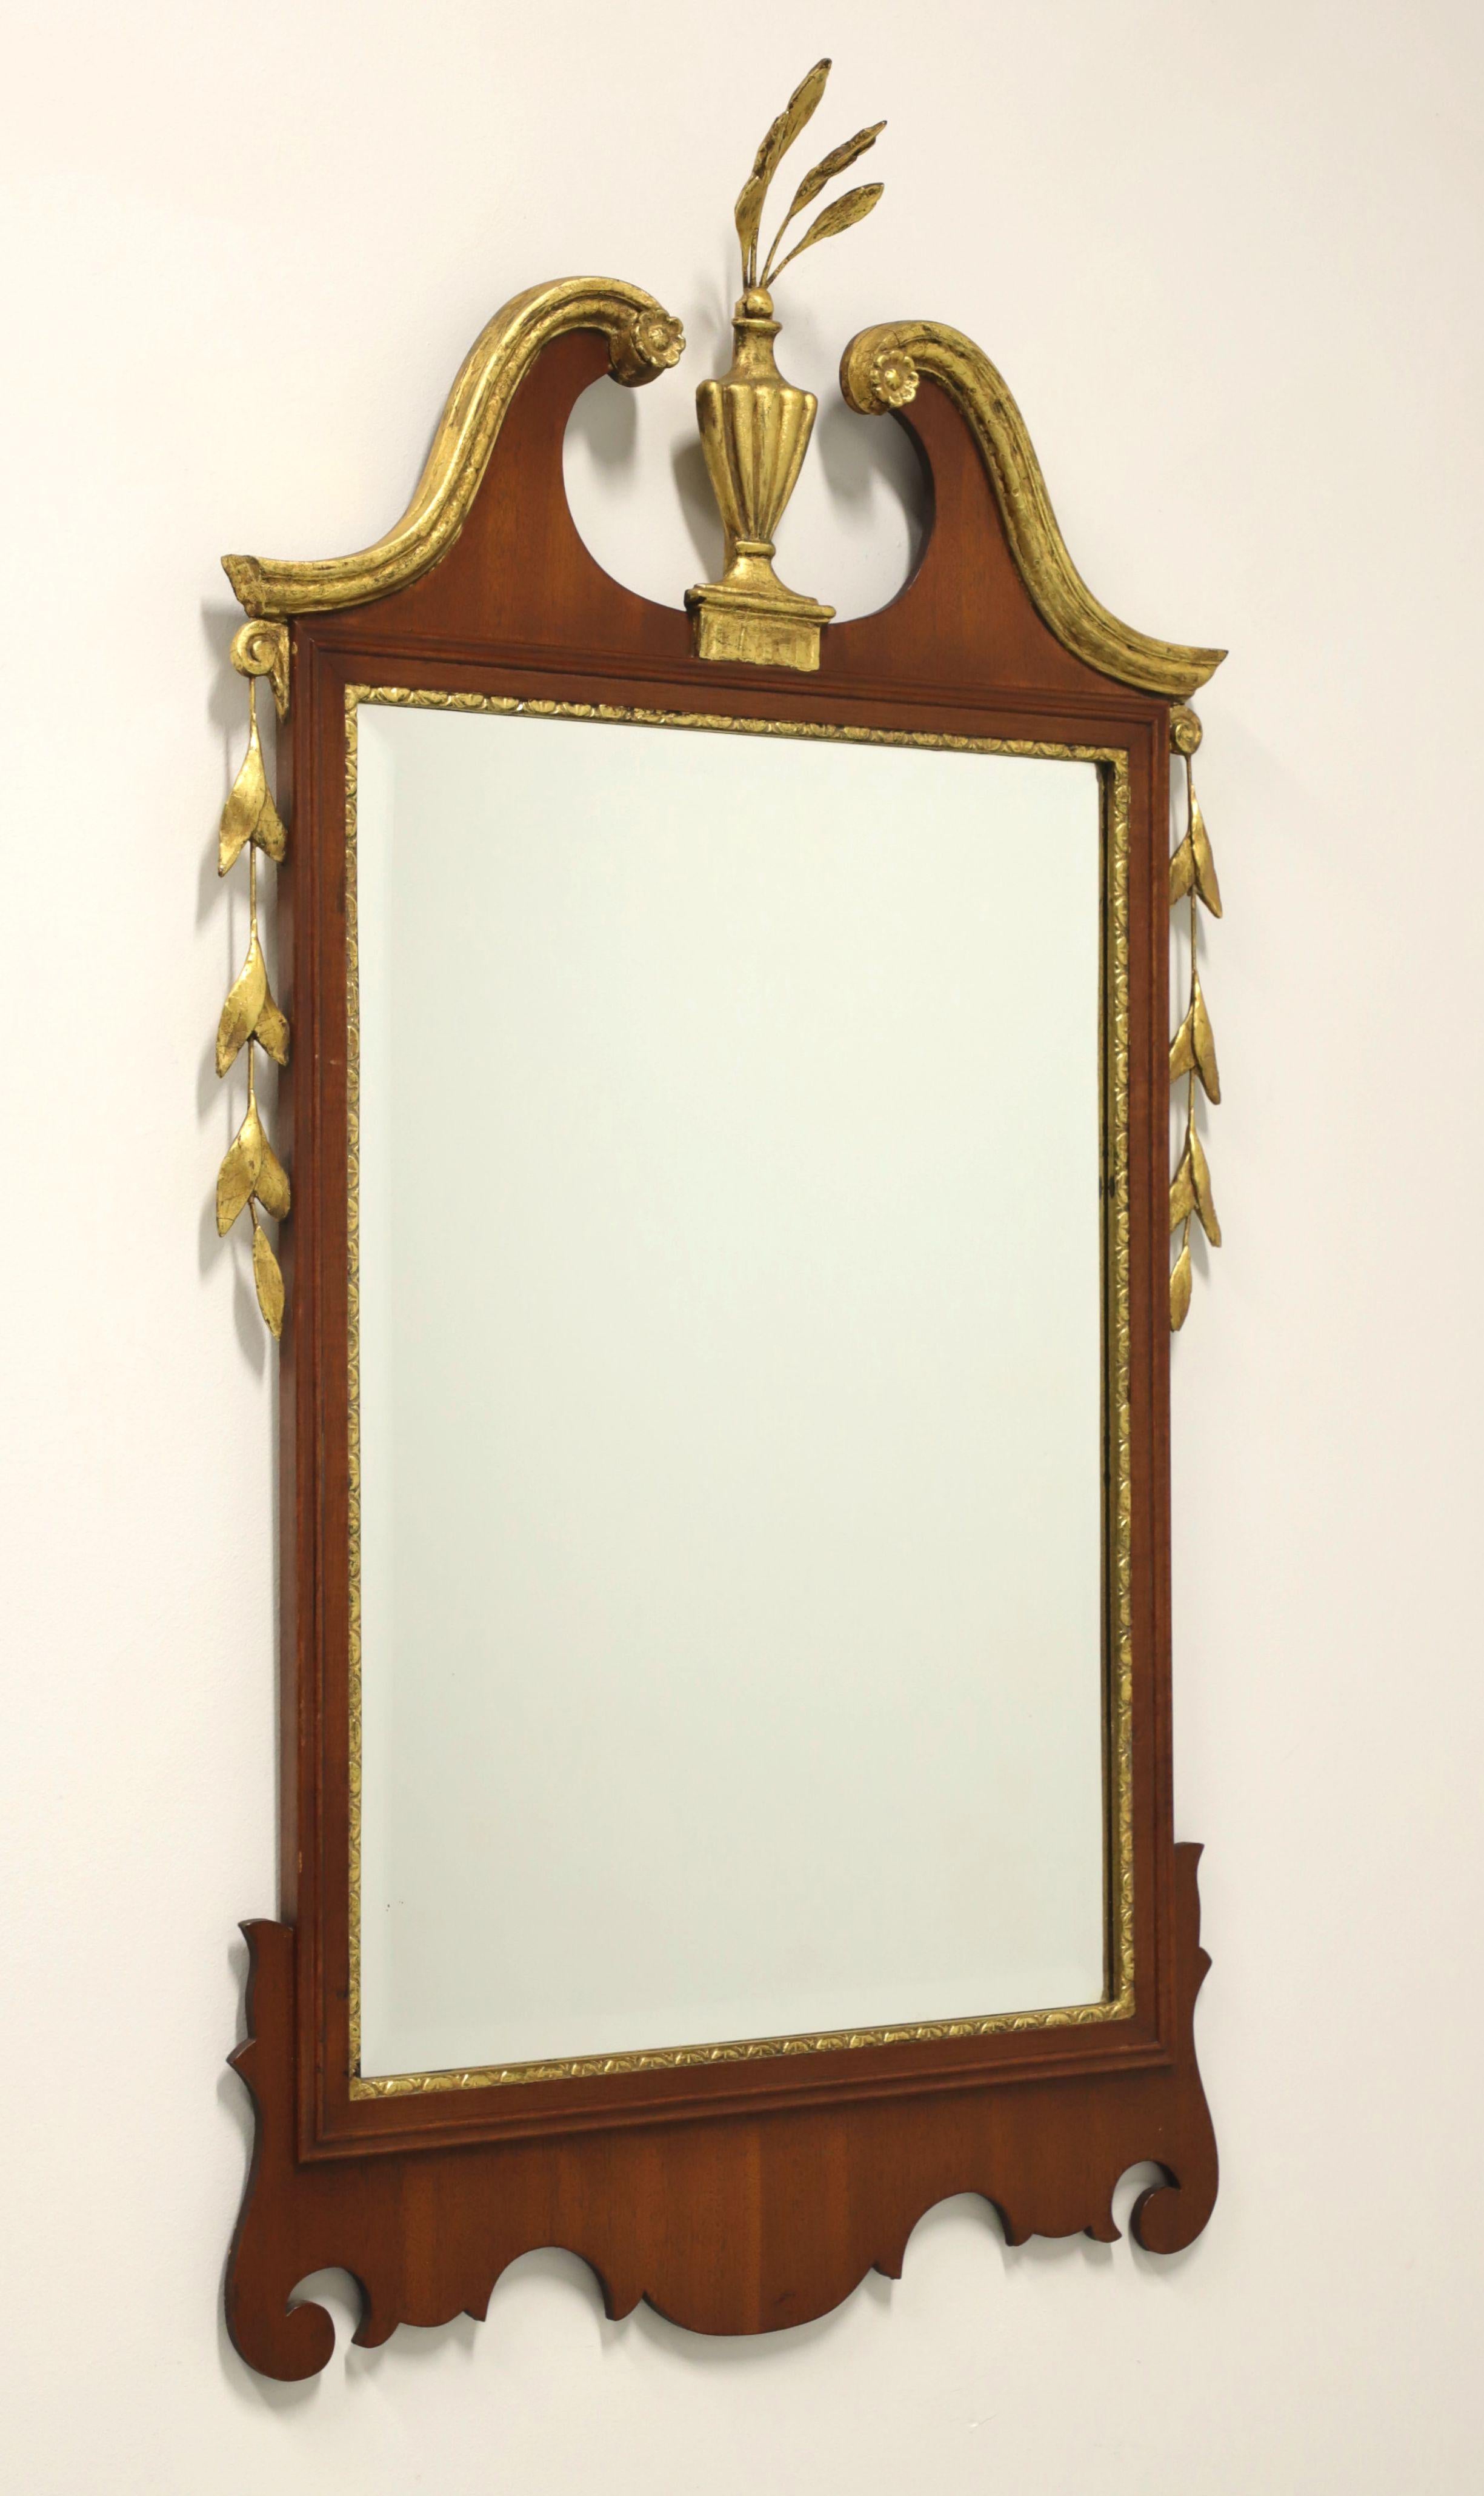 FRIEDMAN BROS Mahogany Gold Gilt Traditional Mirror with Prince of Wales Plumes 3